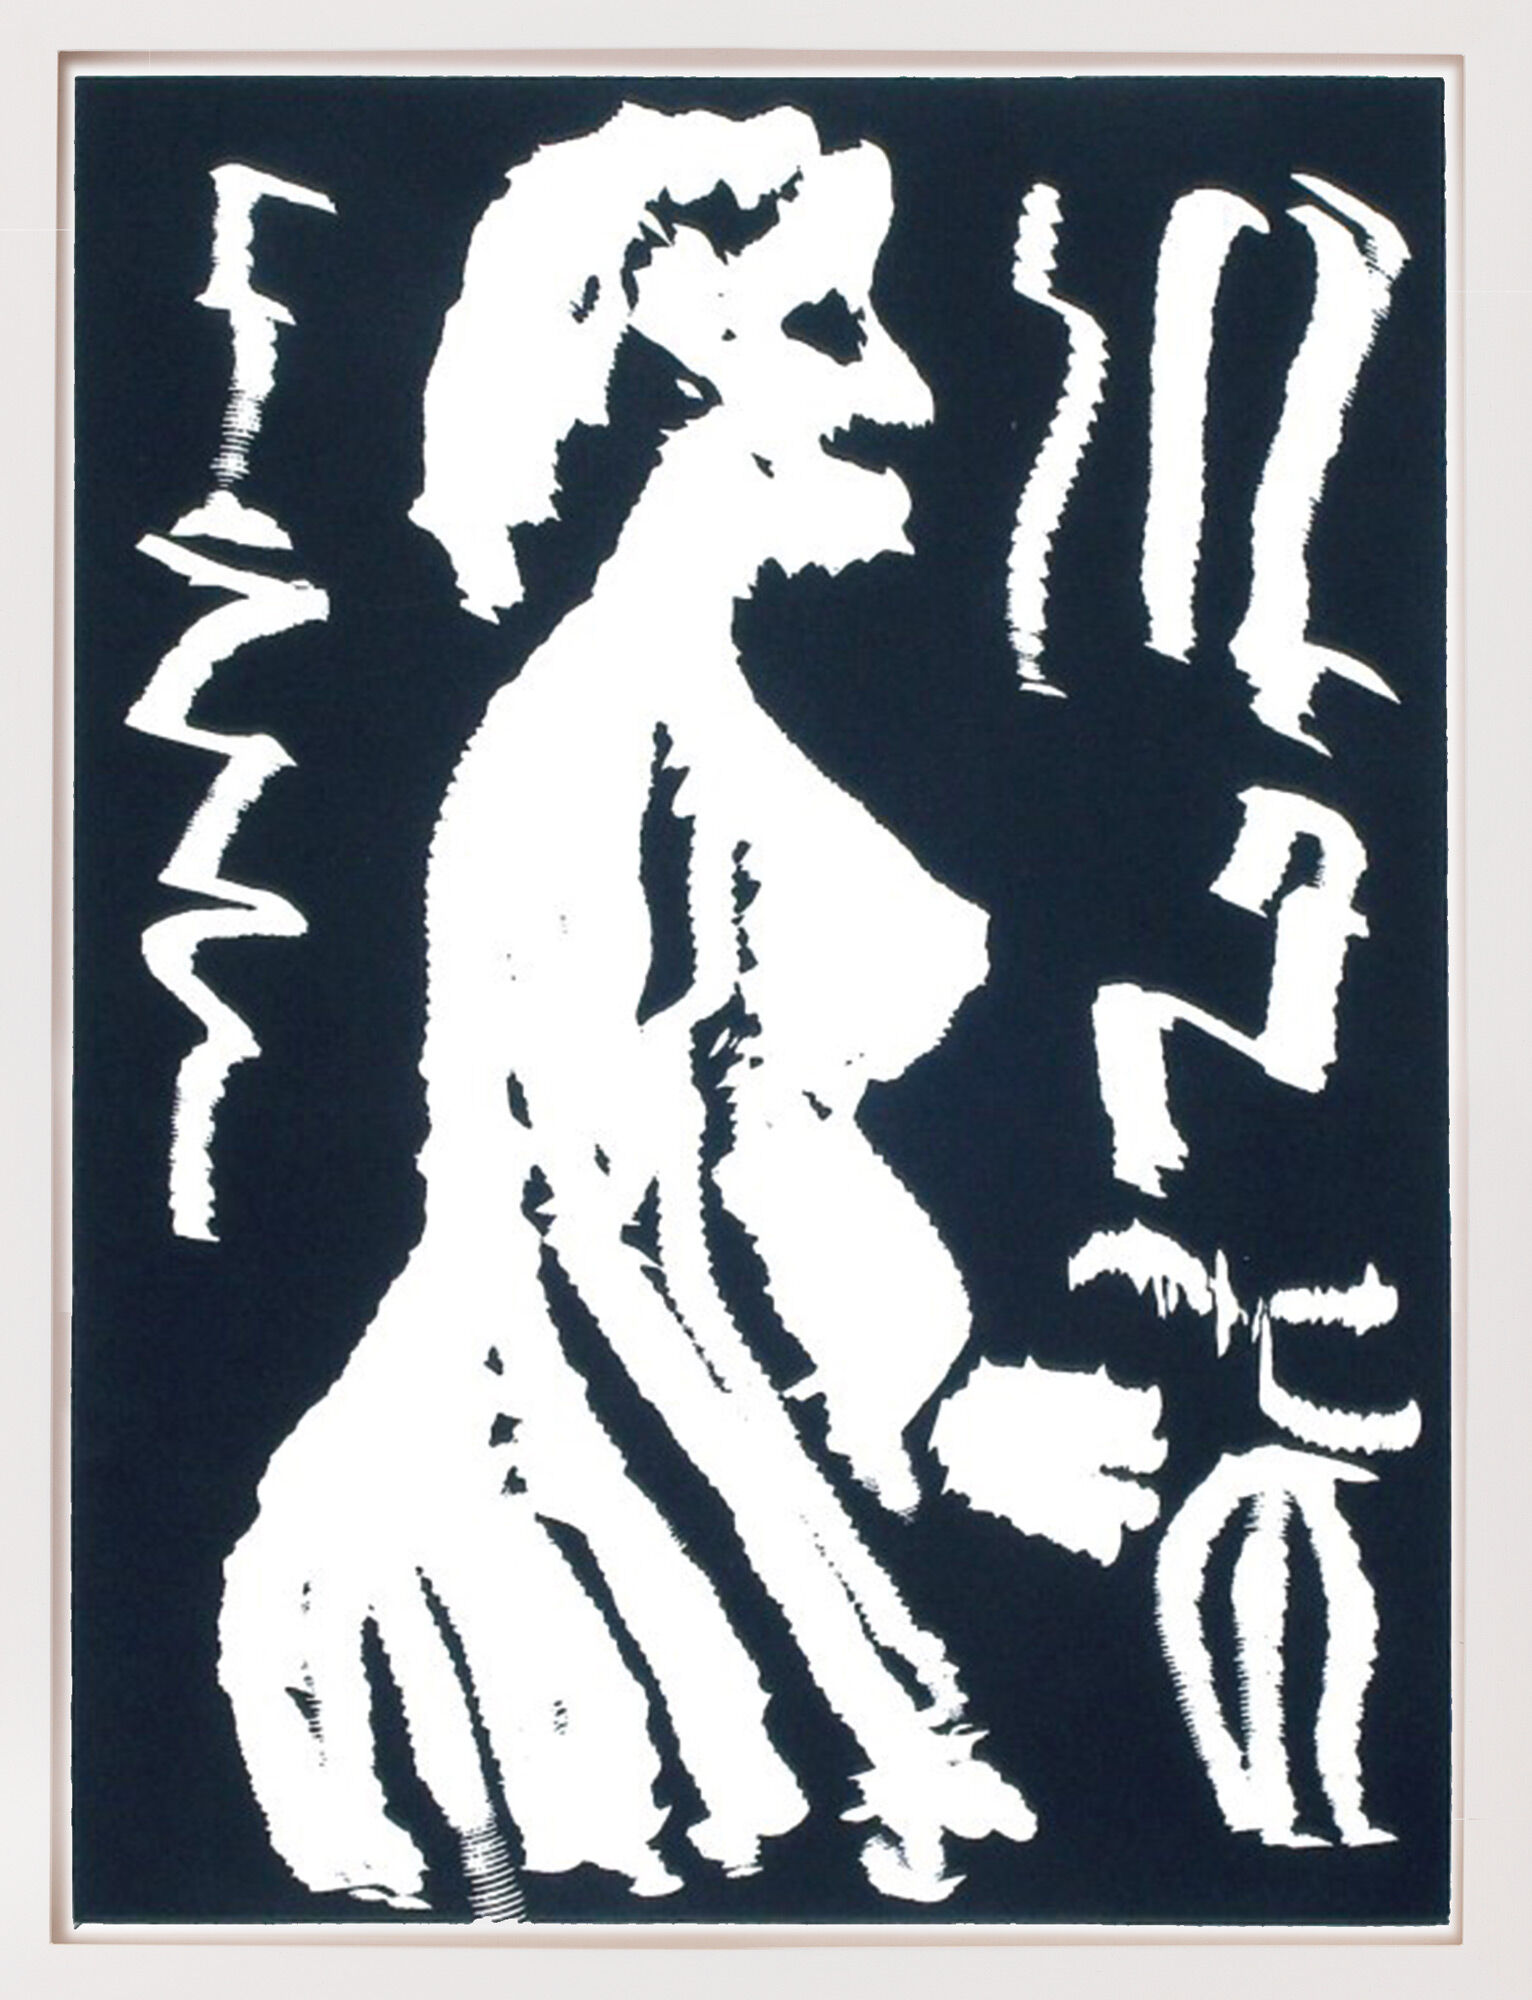 Picture "Woman in Profile" (1987) by A. R. Penck